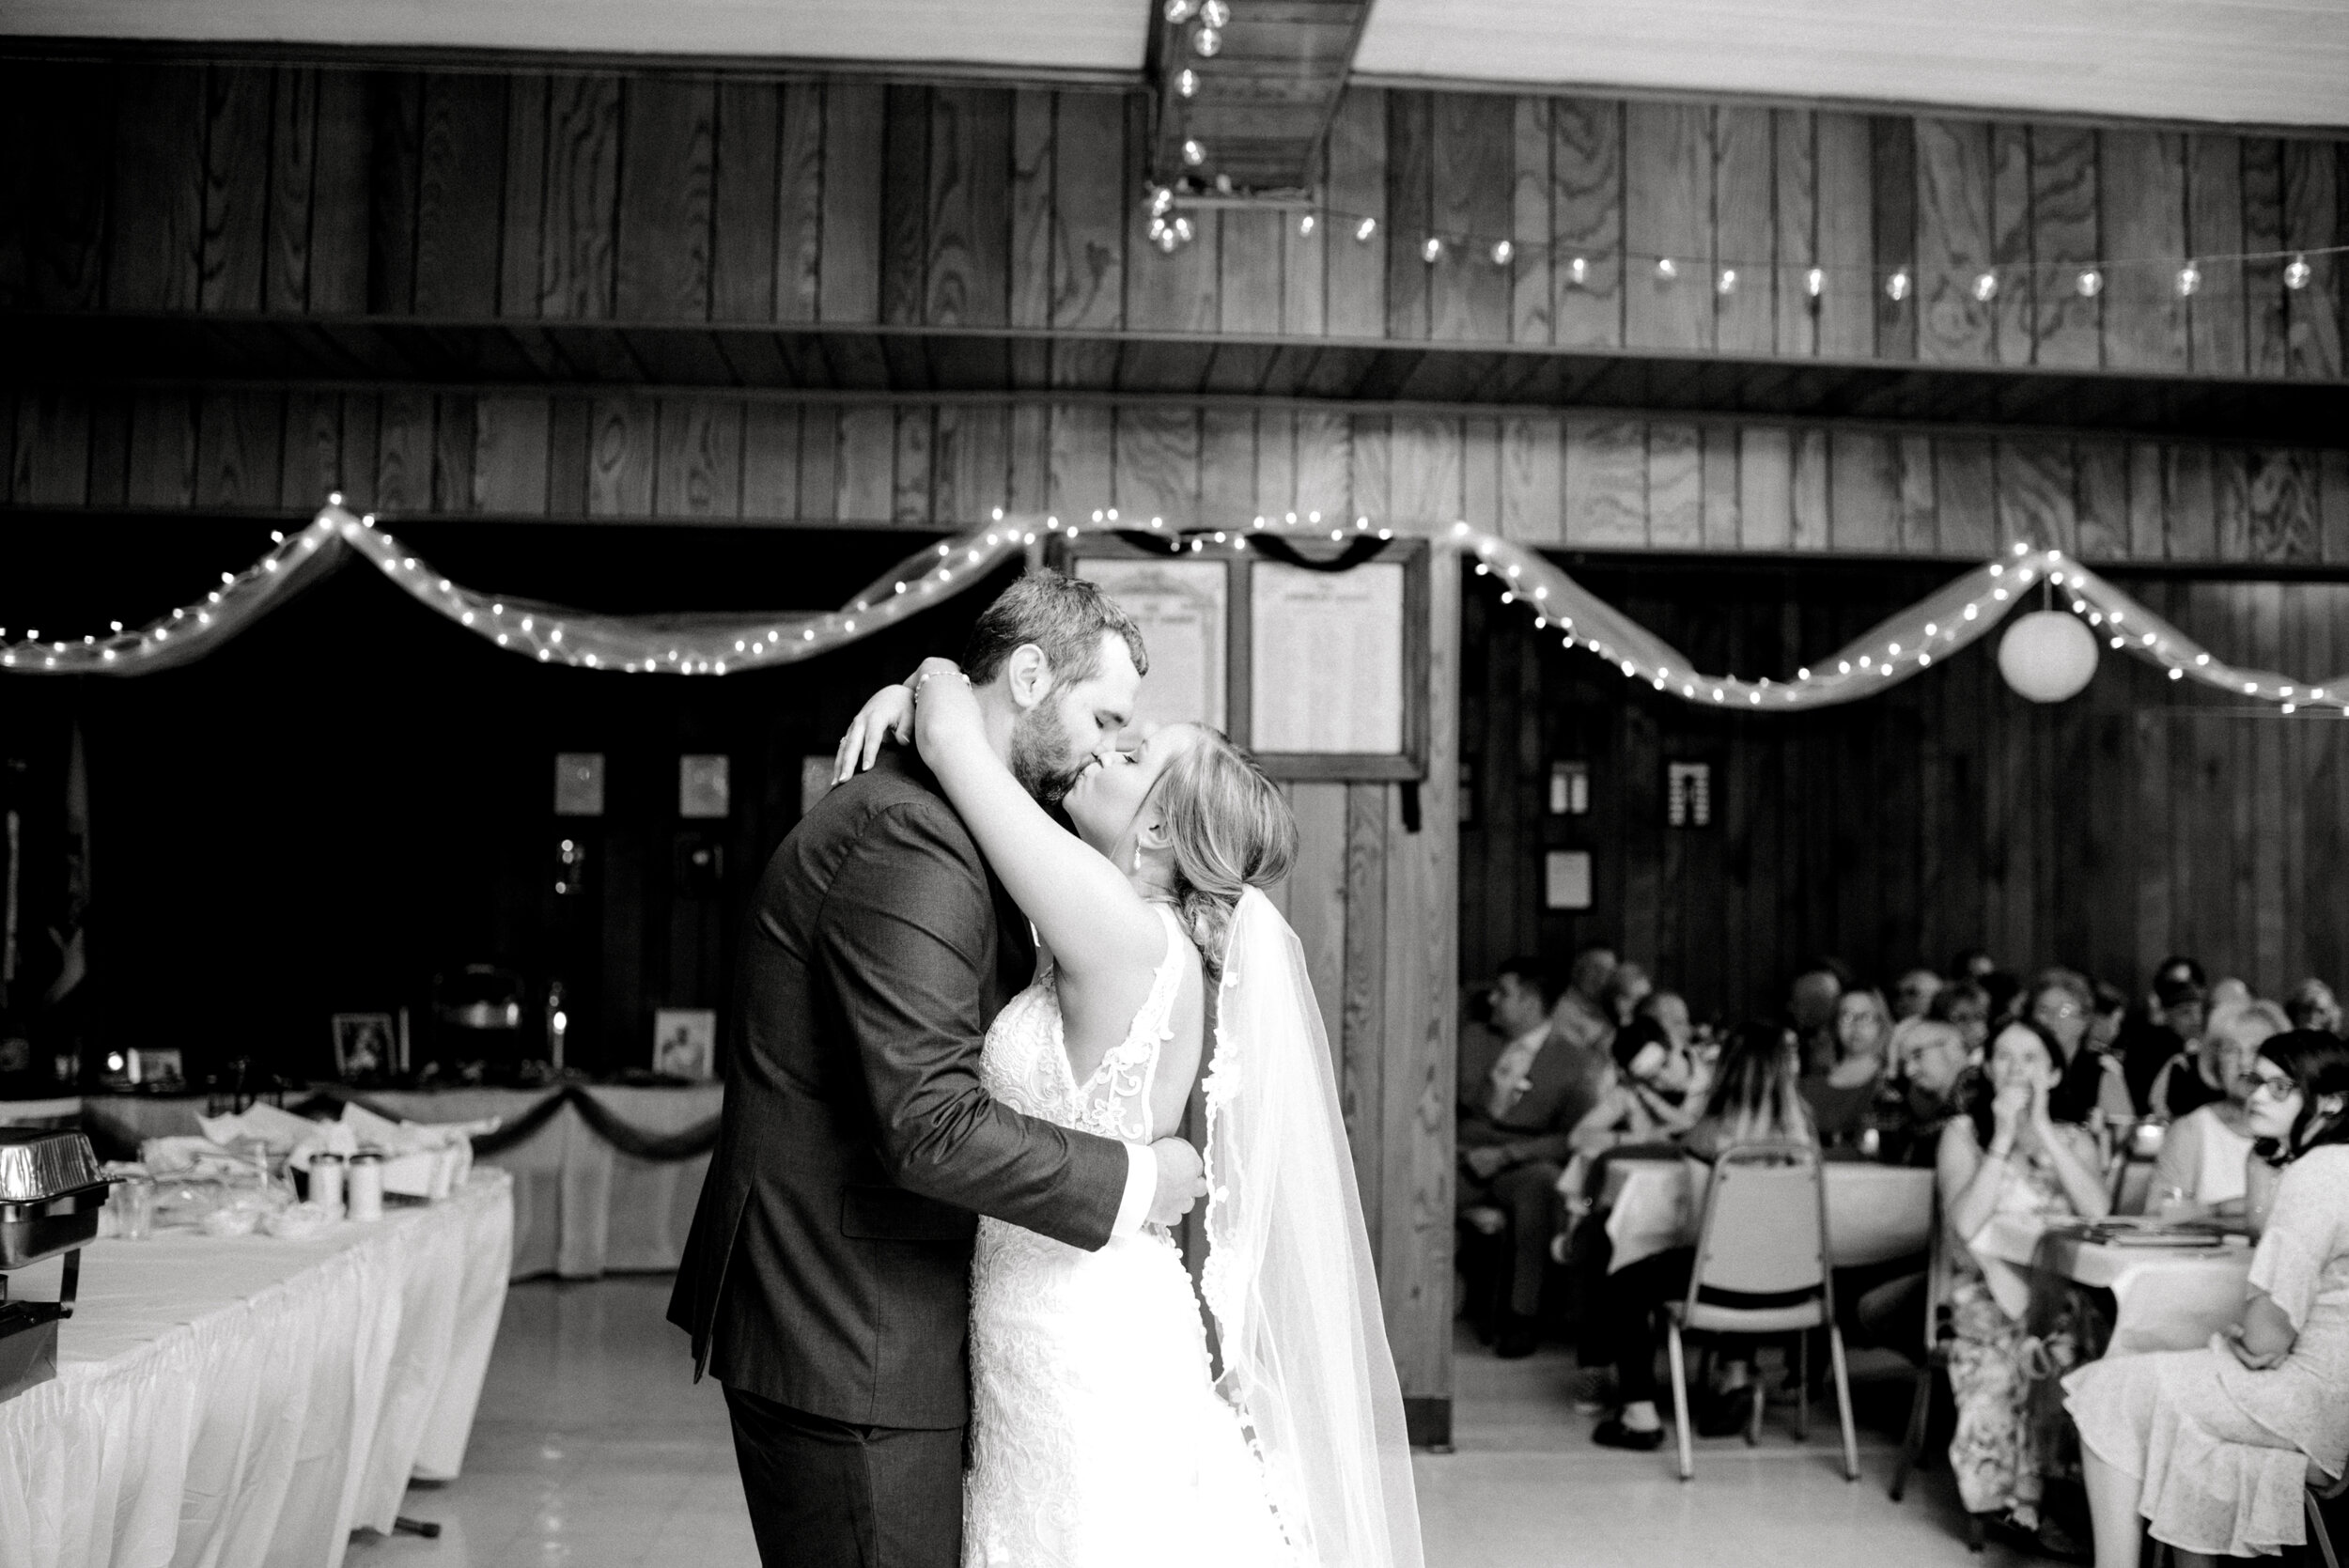 Sharing their first dance as husband and wife!